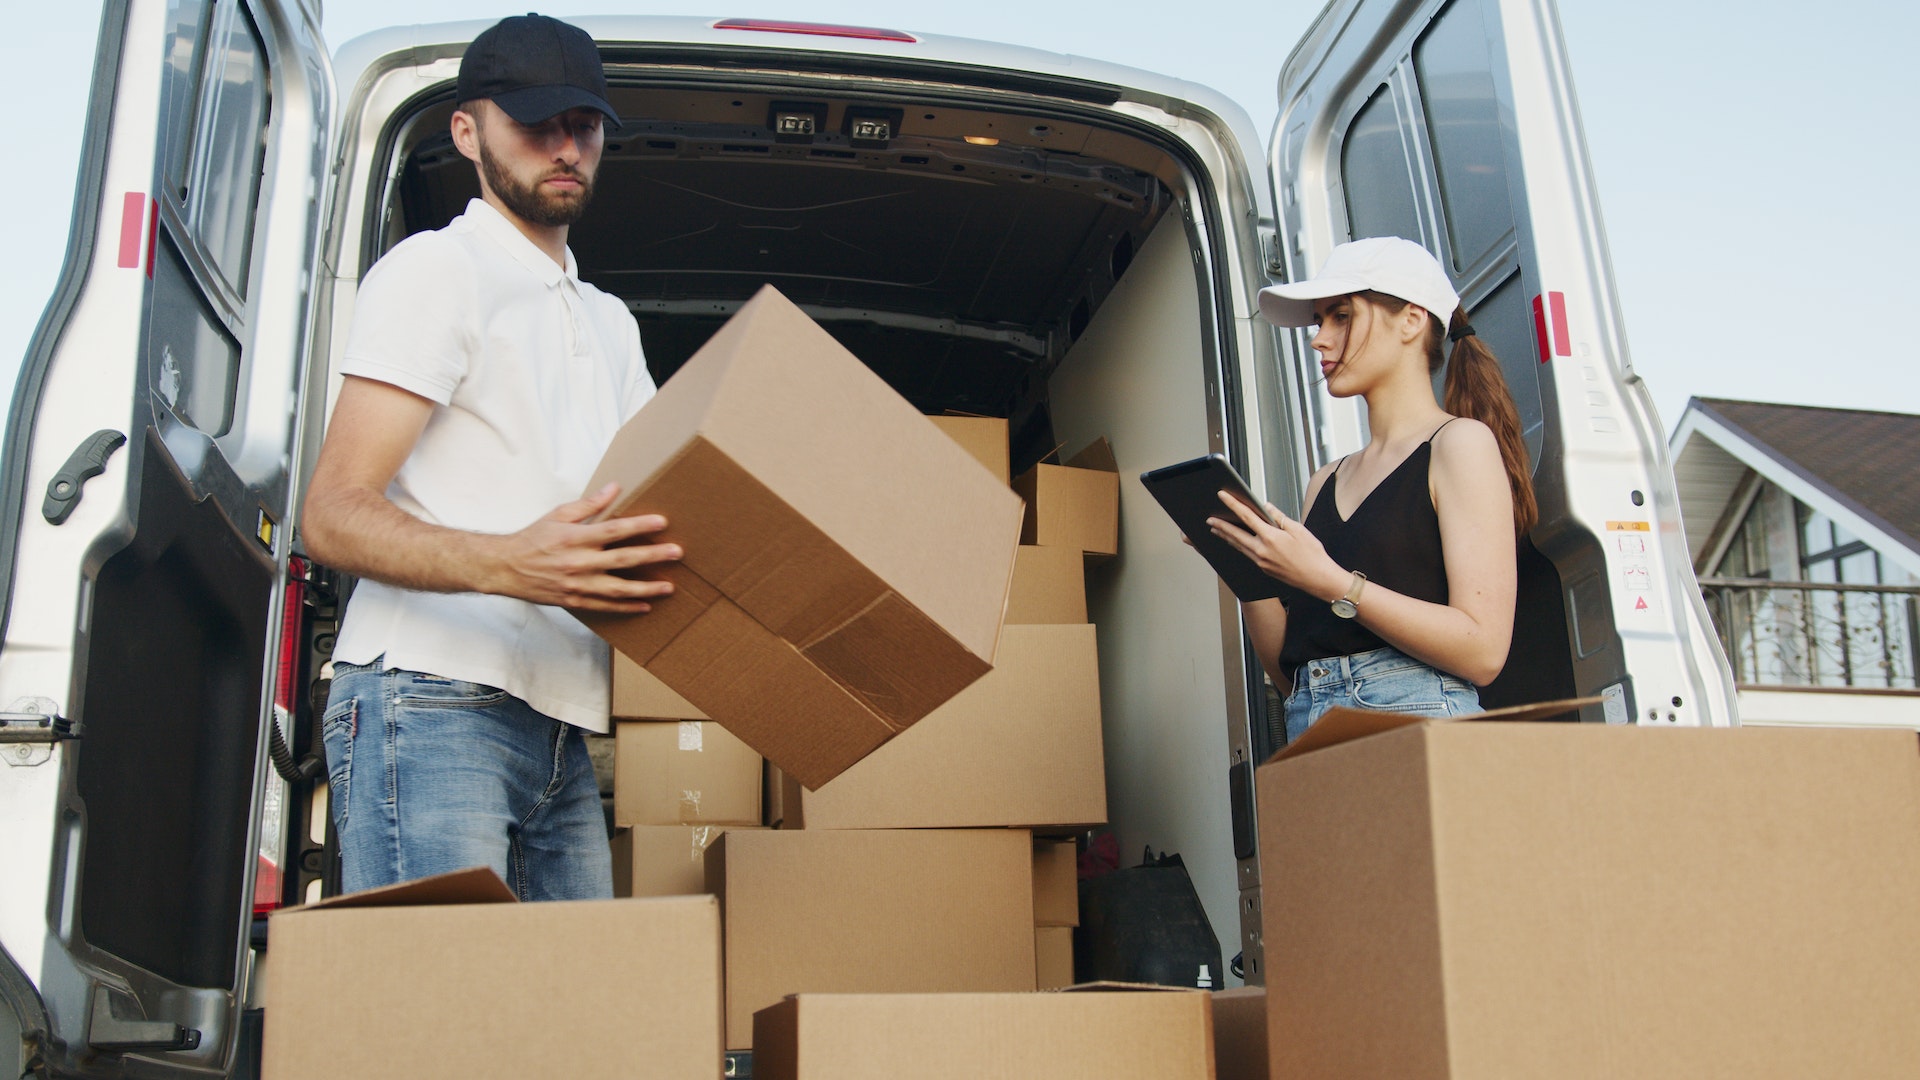 Two people loading boxes into a vehicle | Source: Pexels